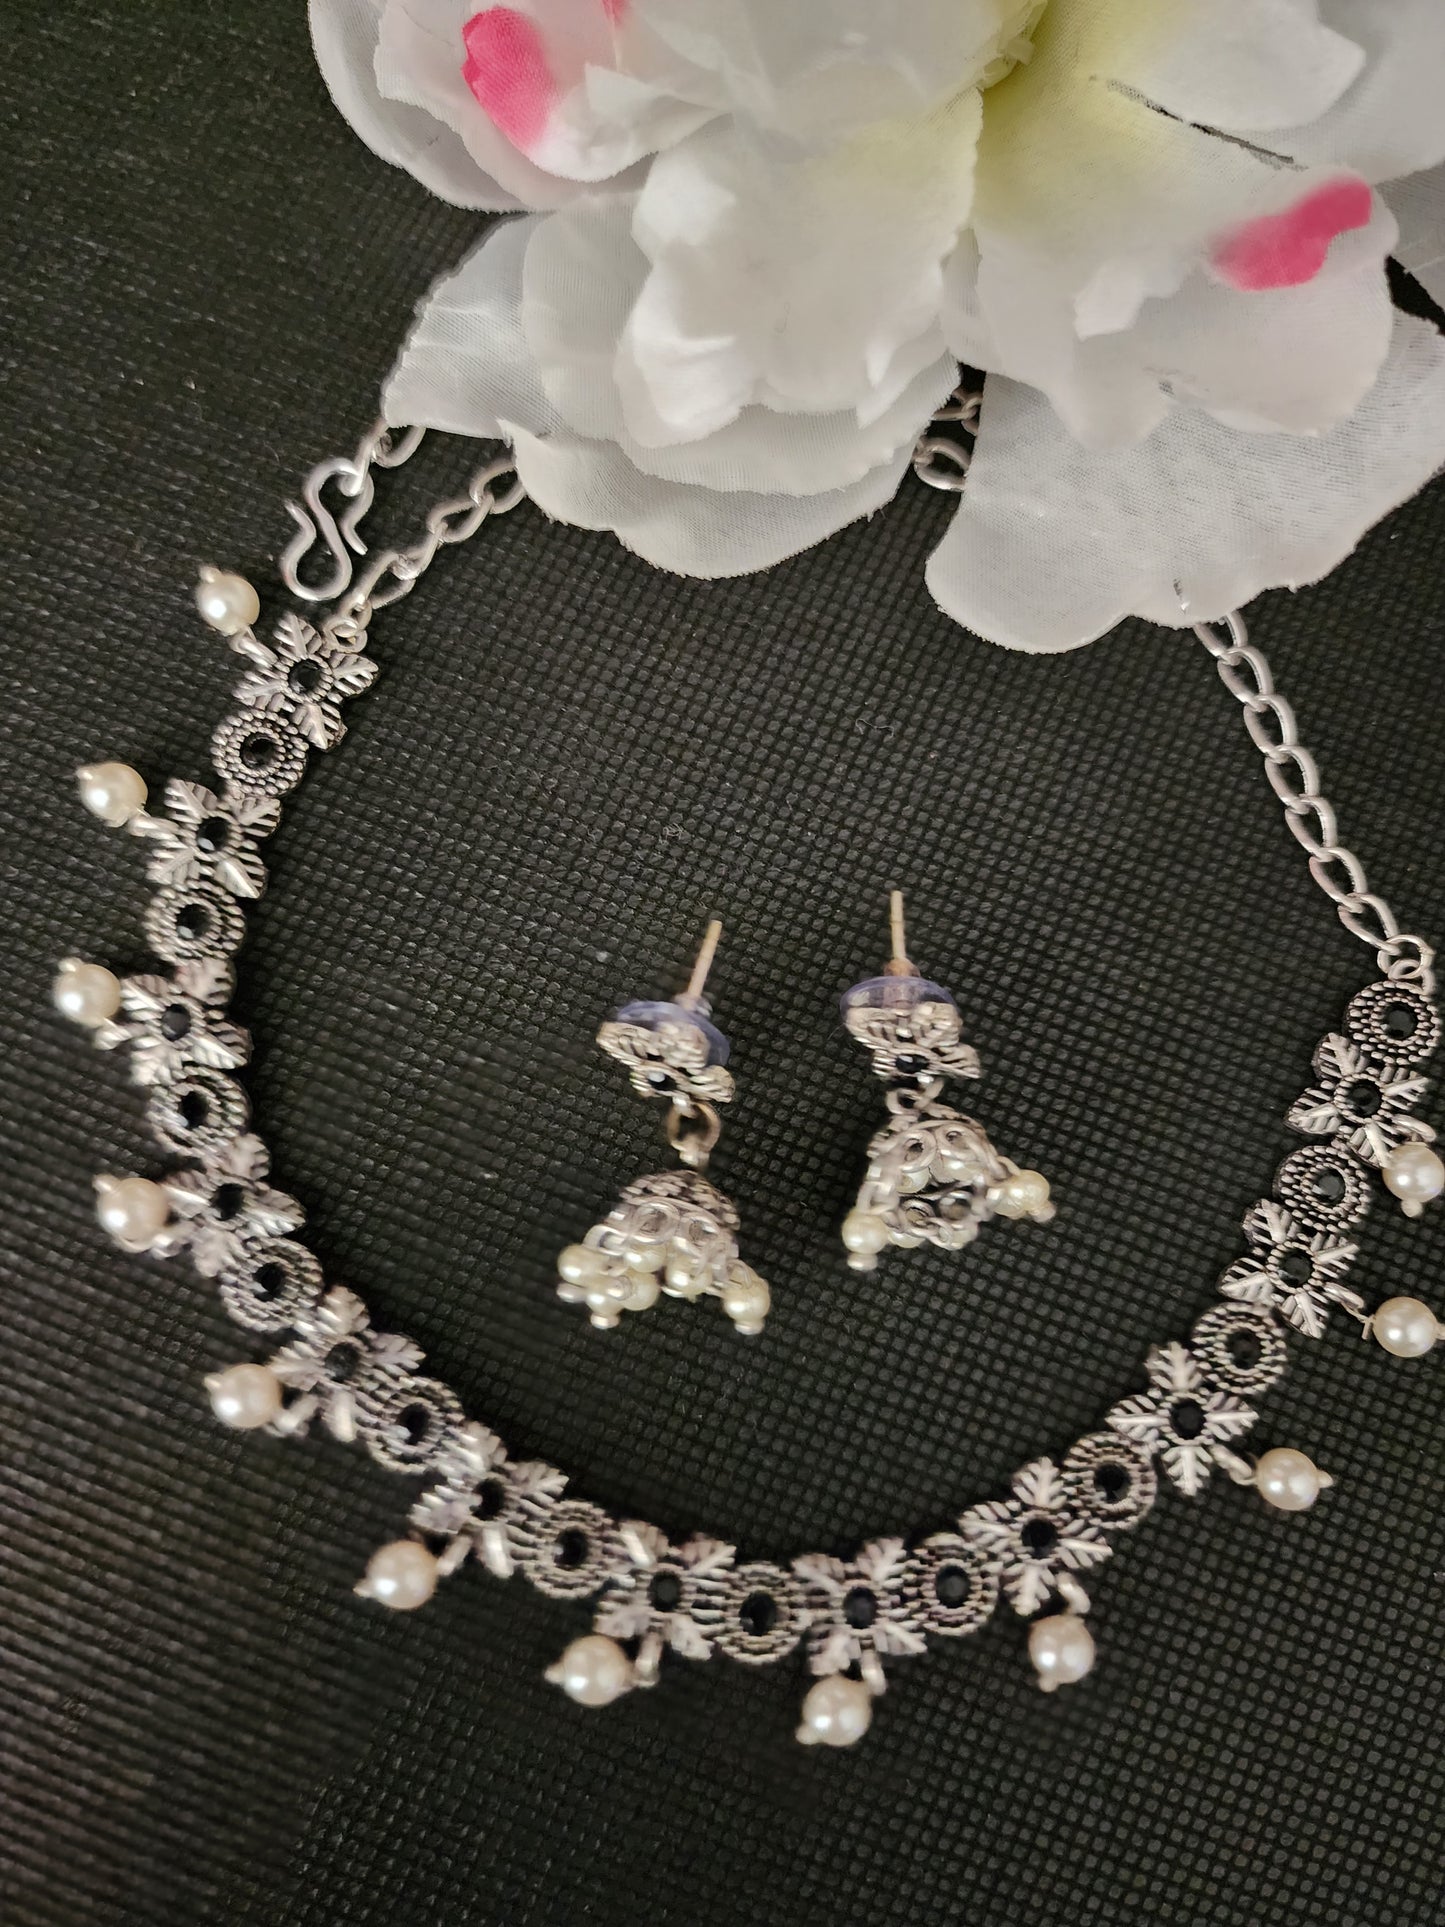 Pearl Necklace and Earrings